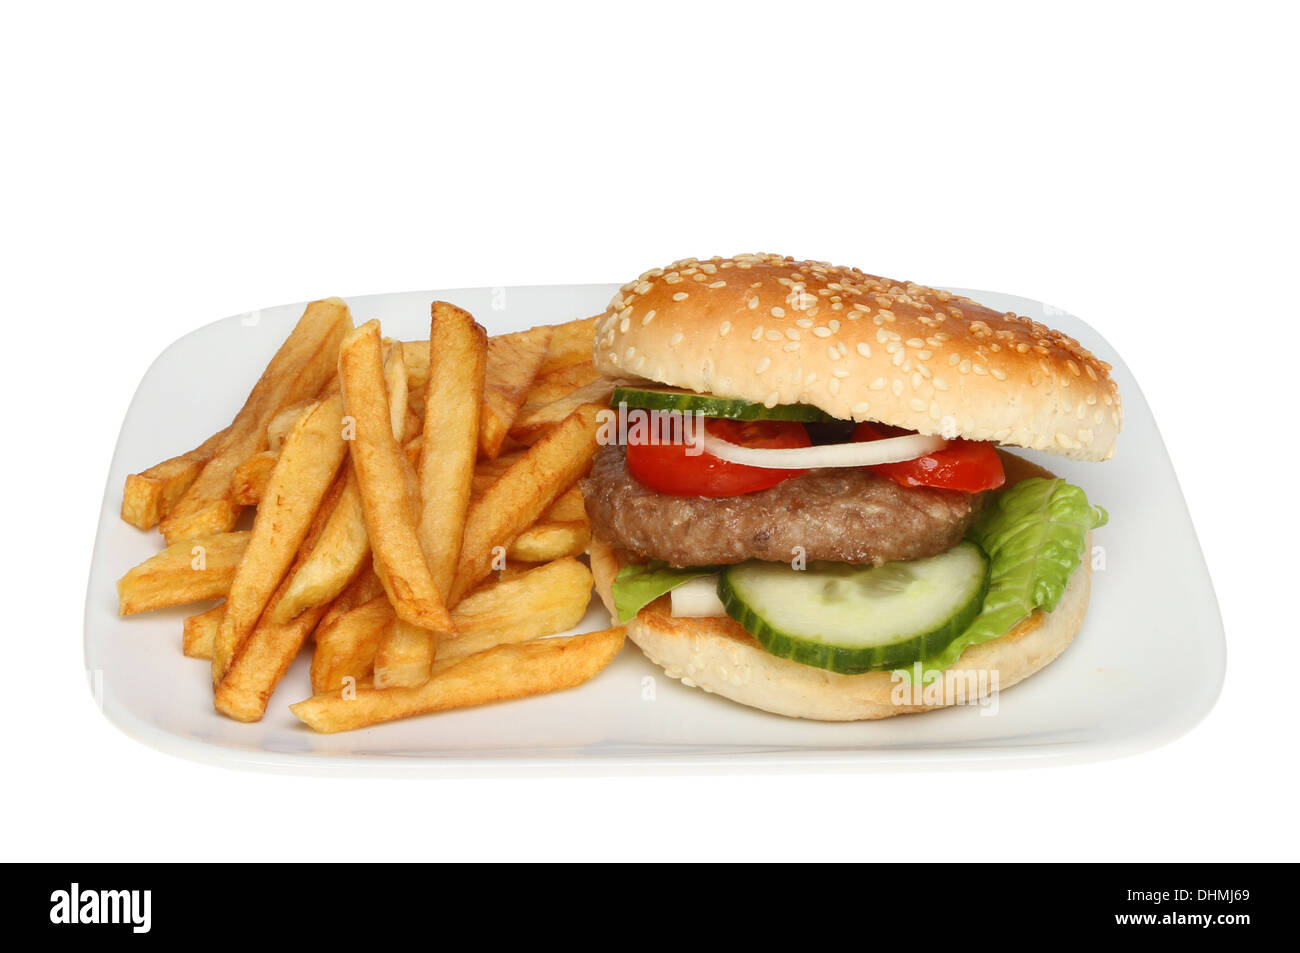 Burger and chips on a plate isolated against white Stock Photo